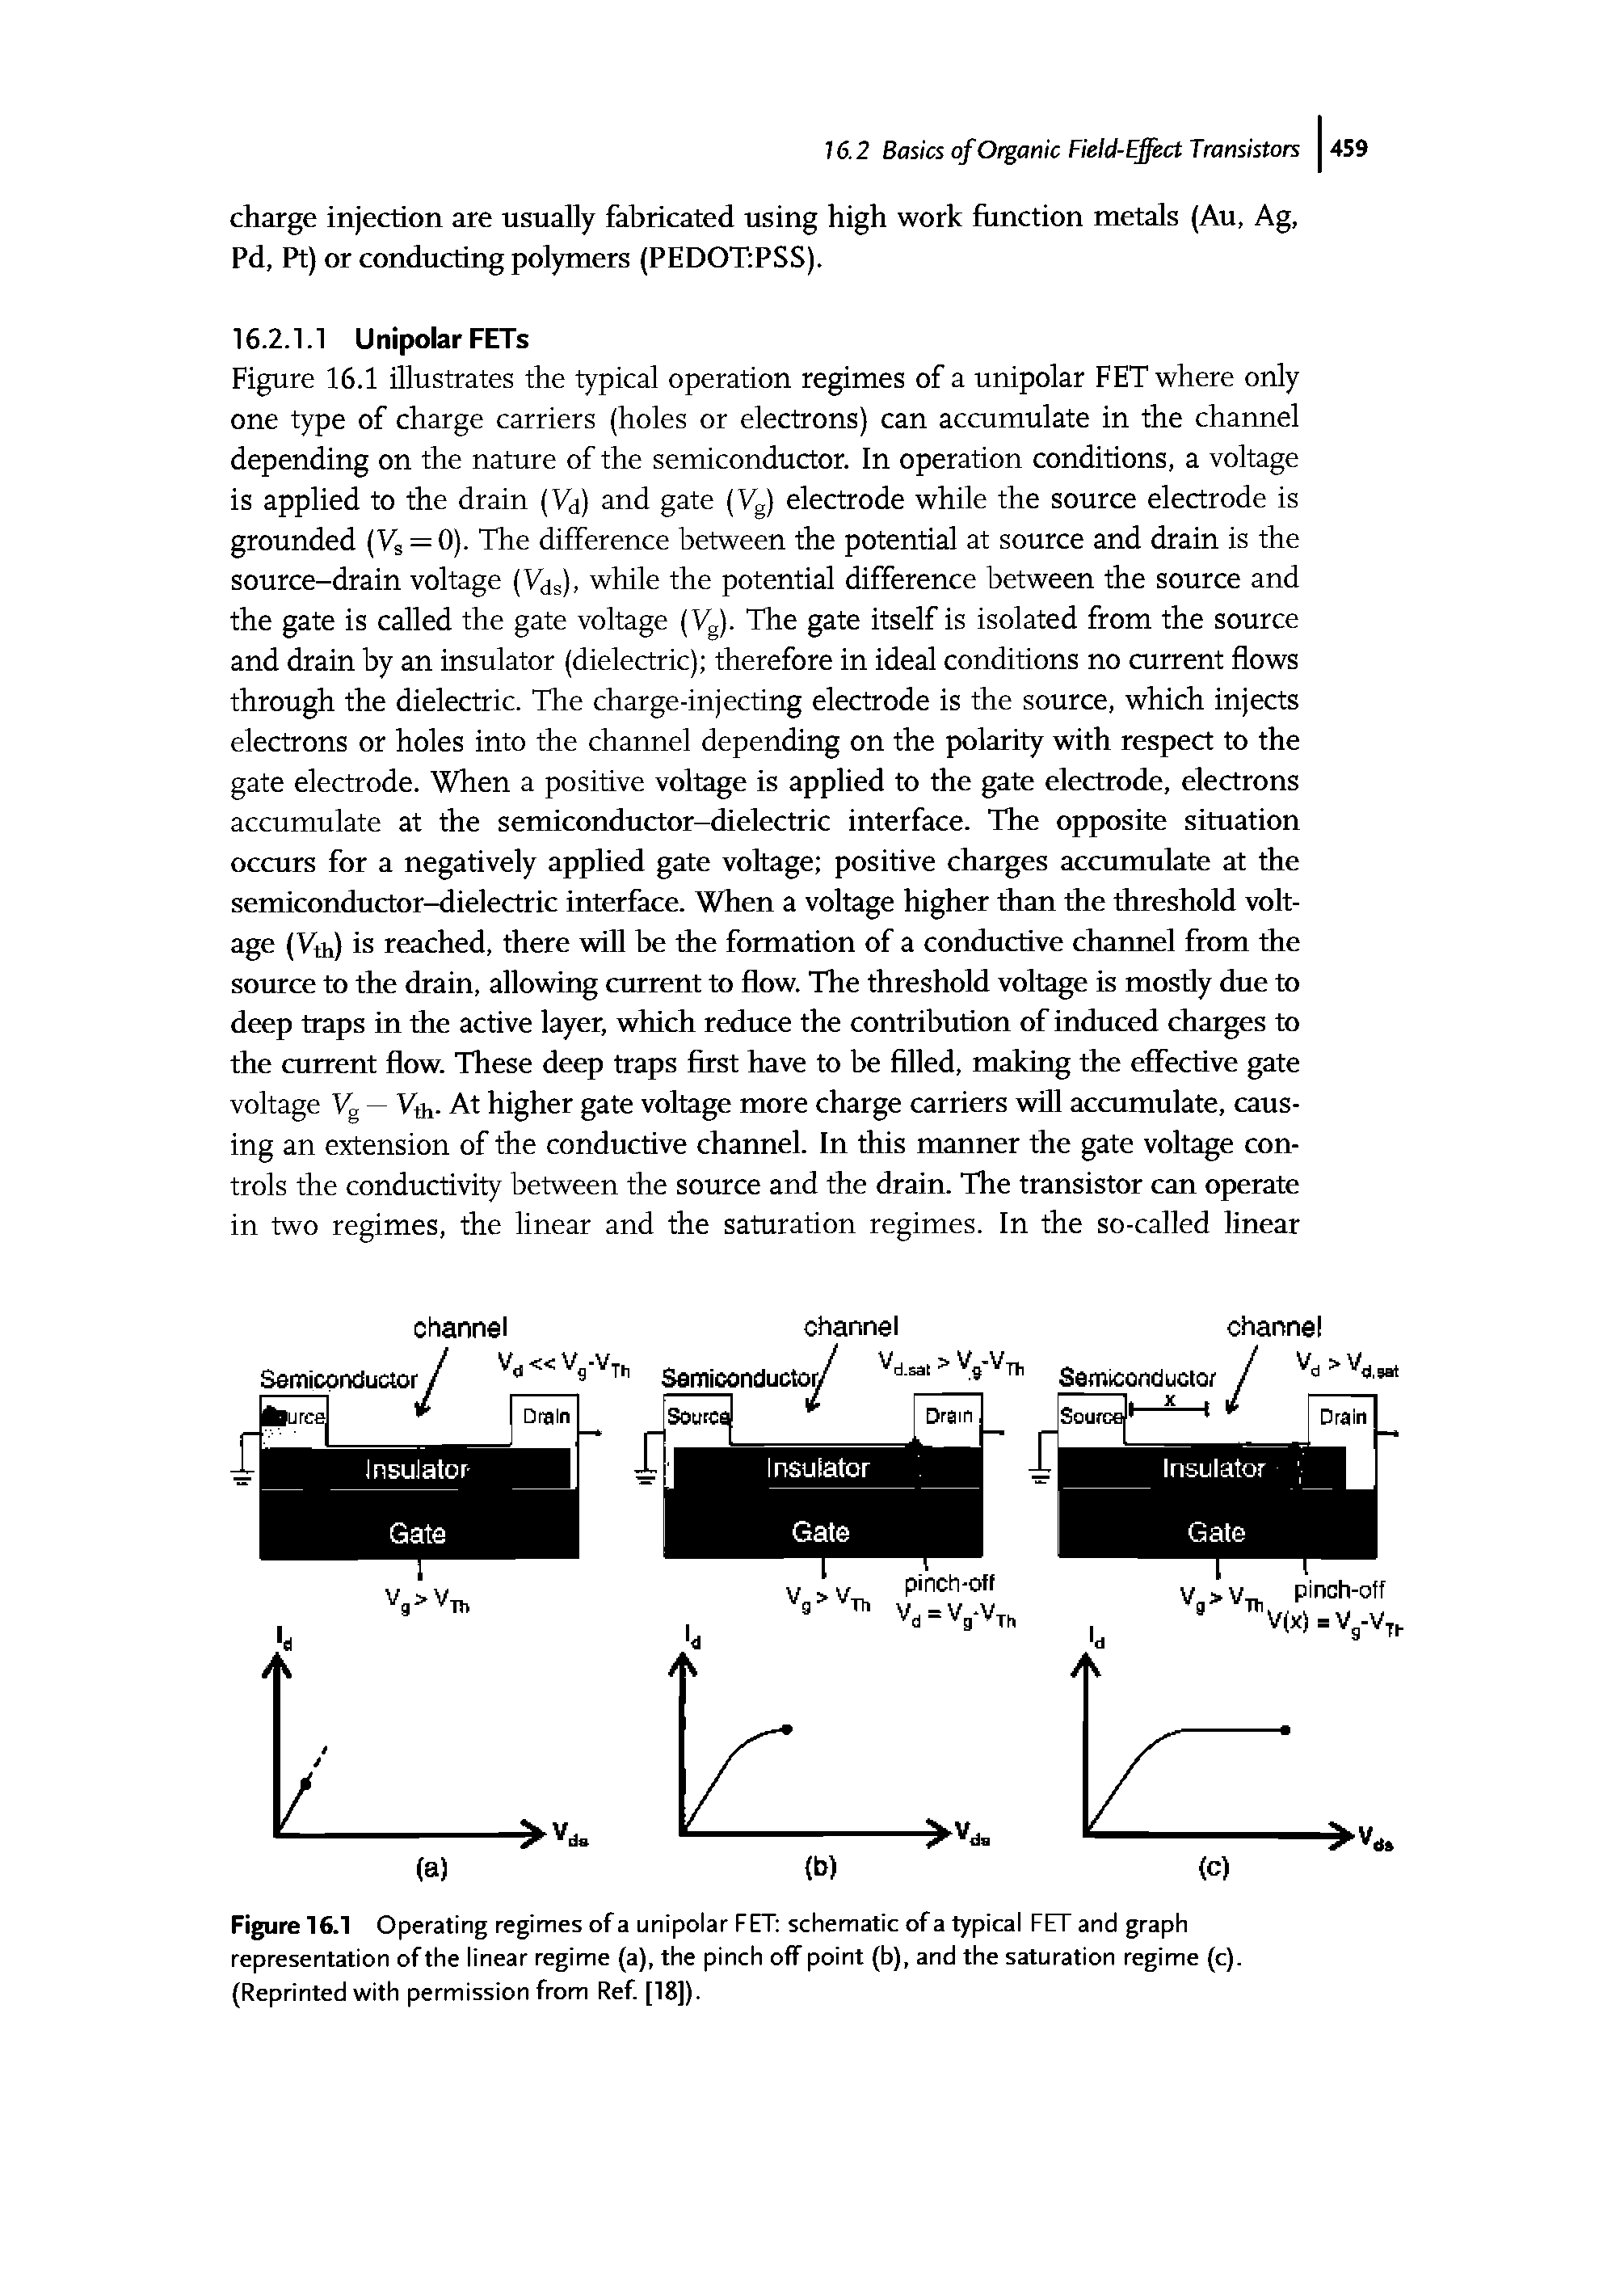 Figure 16.1 Operating regimes of a unipolar FET schematic of a typical FET and graph representation of the linear regime (a), the pinch off point (b), and the saturation regime (c). (Reprinted with permission from Ref [18]).